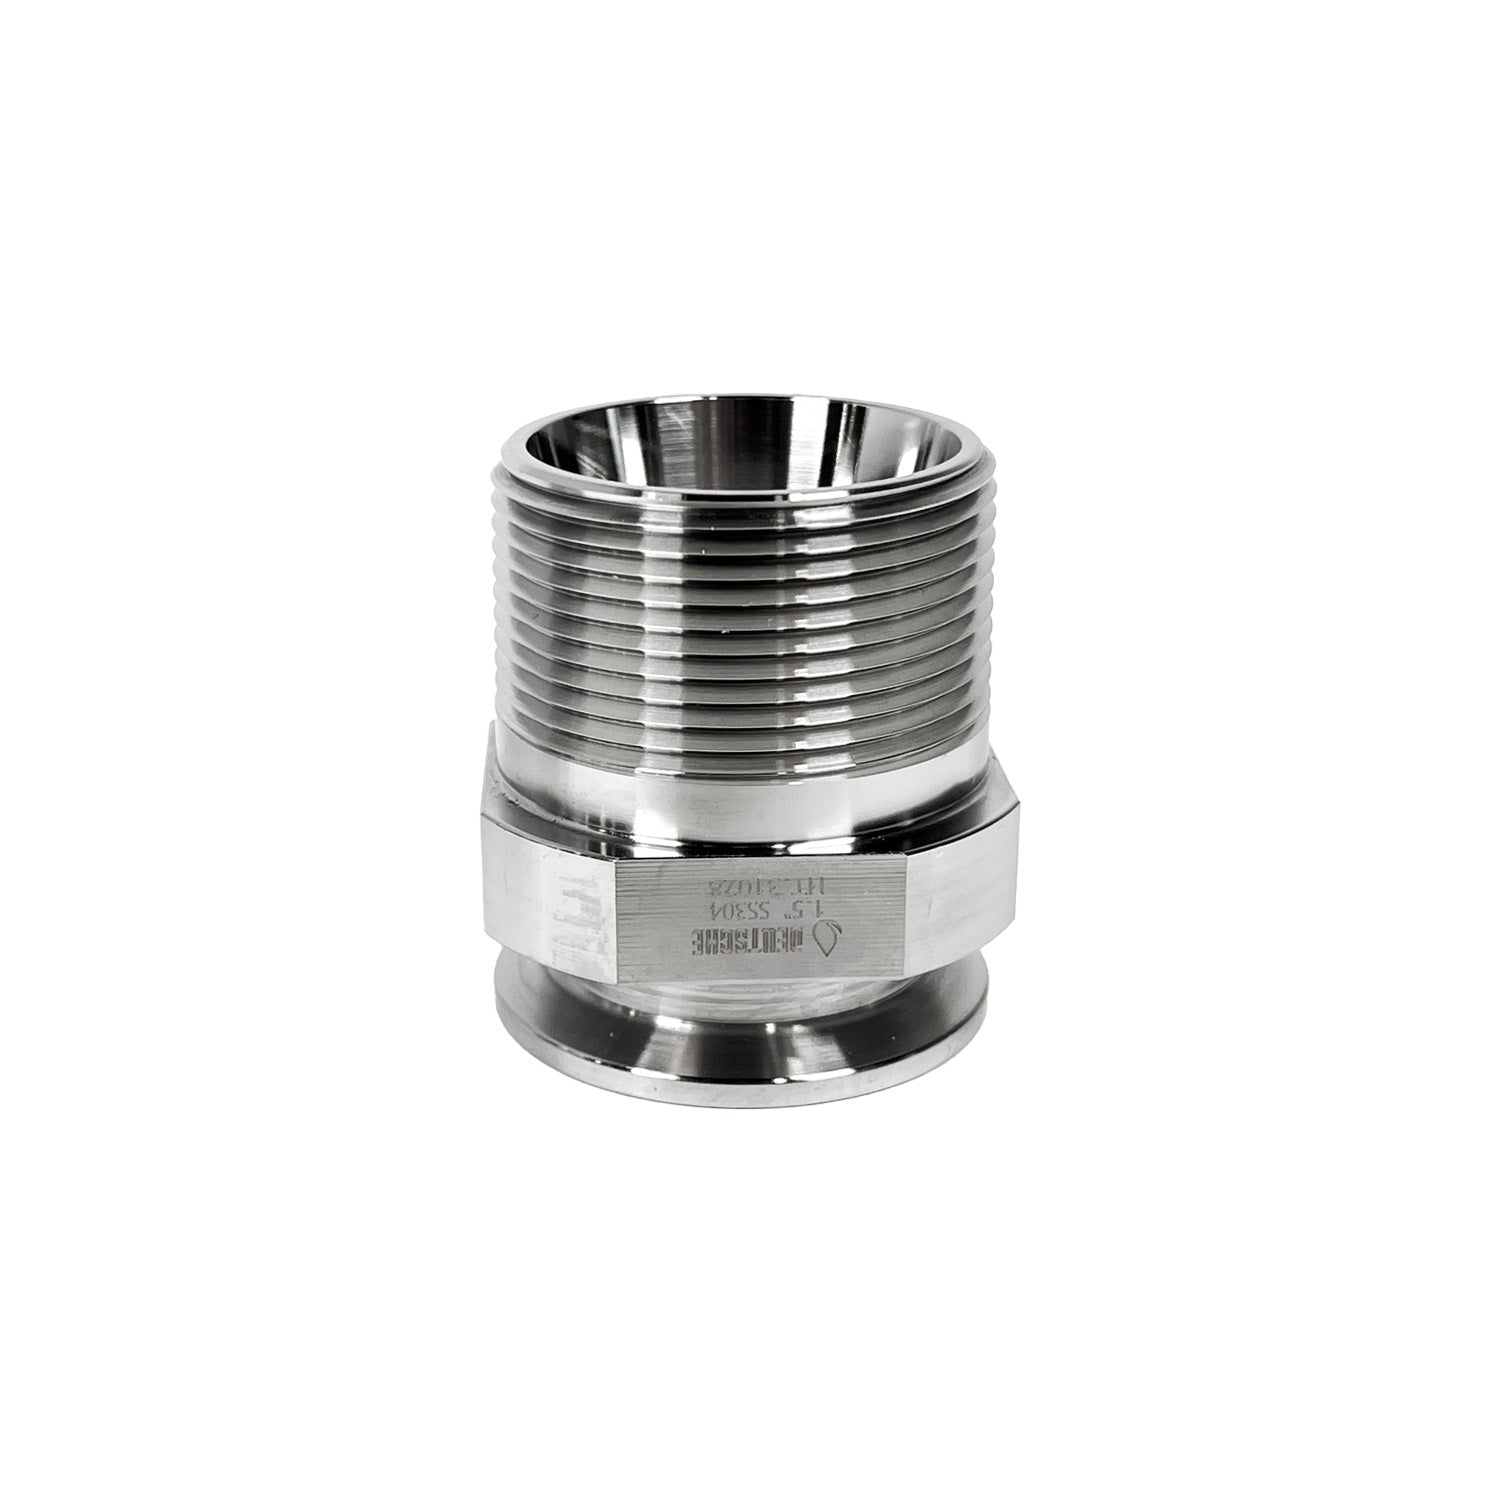 1.5” Male NPT- 304 Stainless